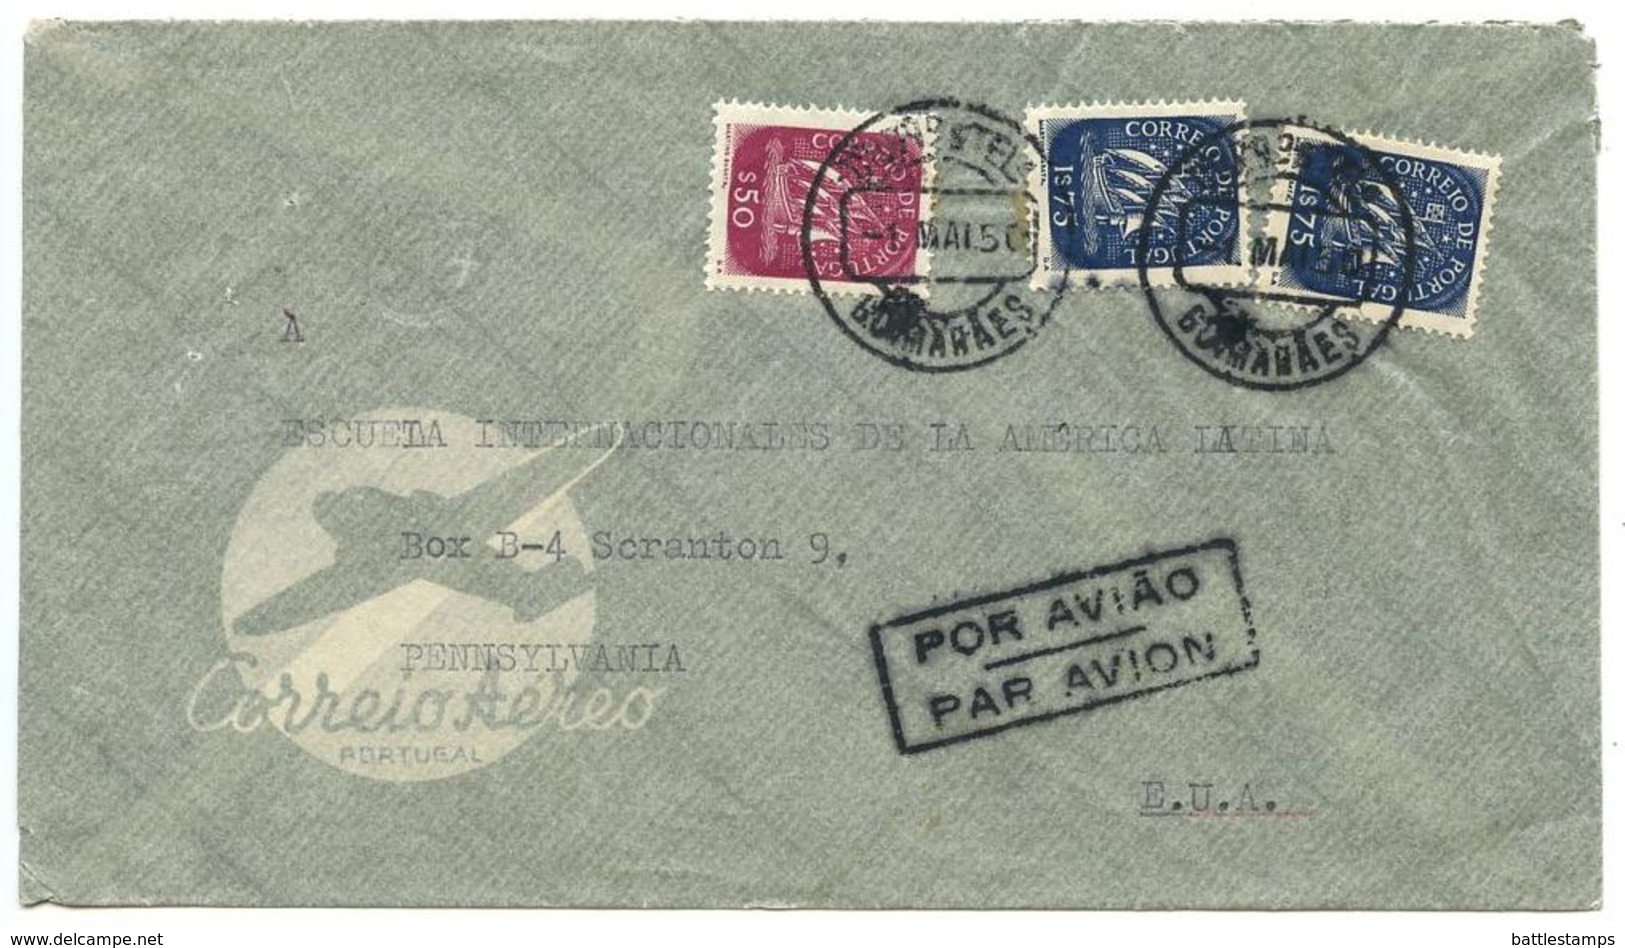 Portugal 1950 Airmail Cover Guimarães To U.S. W/ Scott 621 & 623 - Covers & Documents